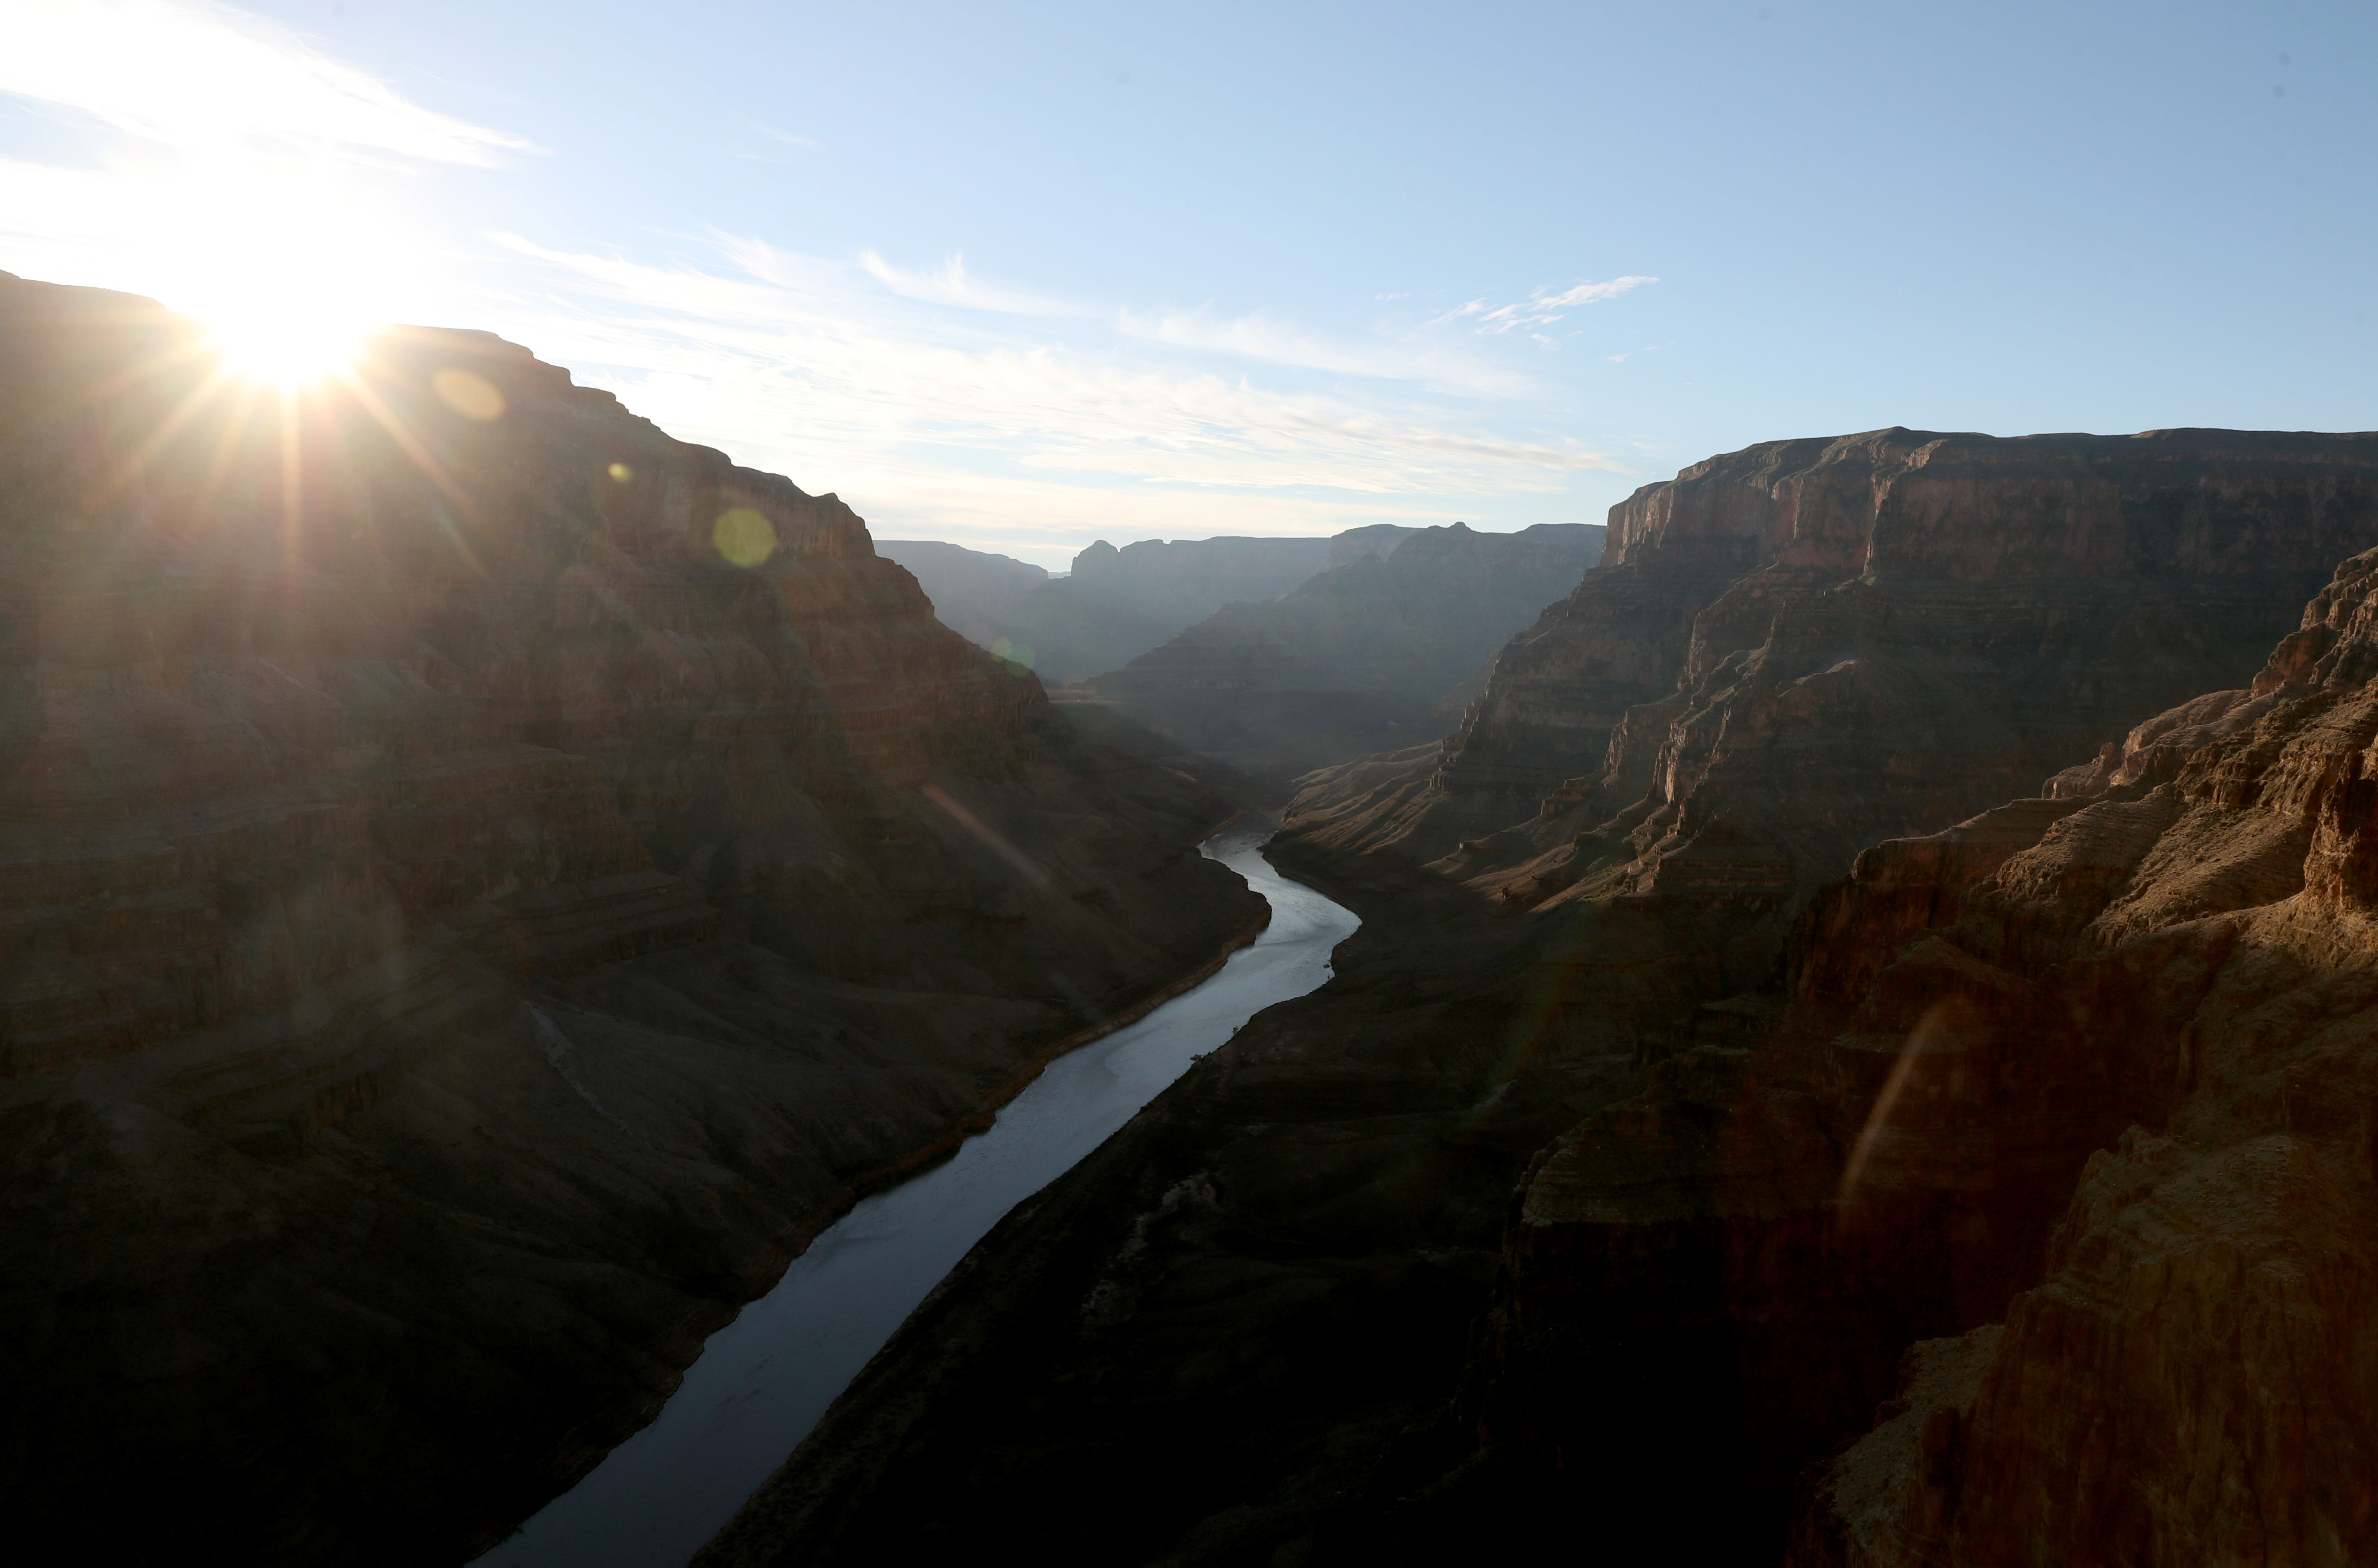 PEACH SPRINGS, ARIZONA - JANUARY 10: The Colorado River winds its way along the West Rim of the Grand Canyon in the Hualapai Indian Reservation on January 10, 2019 near Peach Springs, Arizona. (Justin Sullivan/Getty Images)